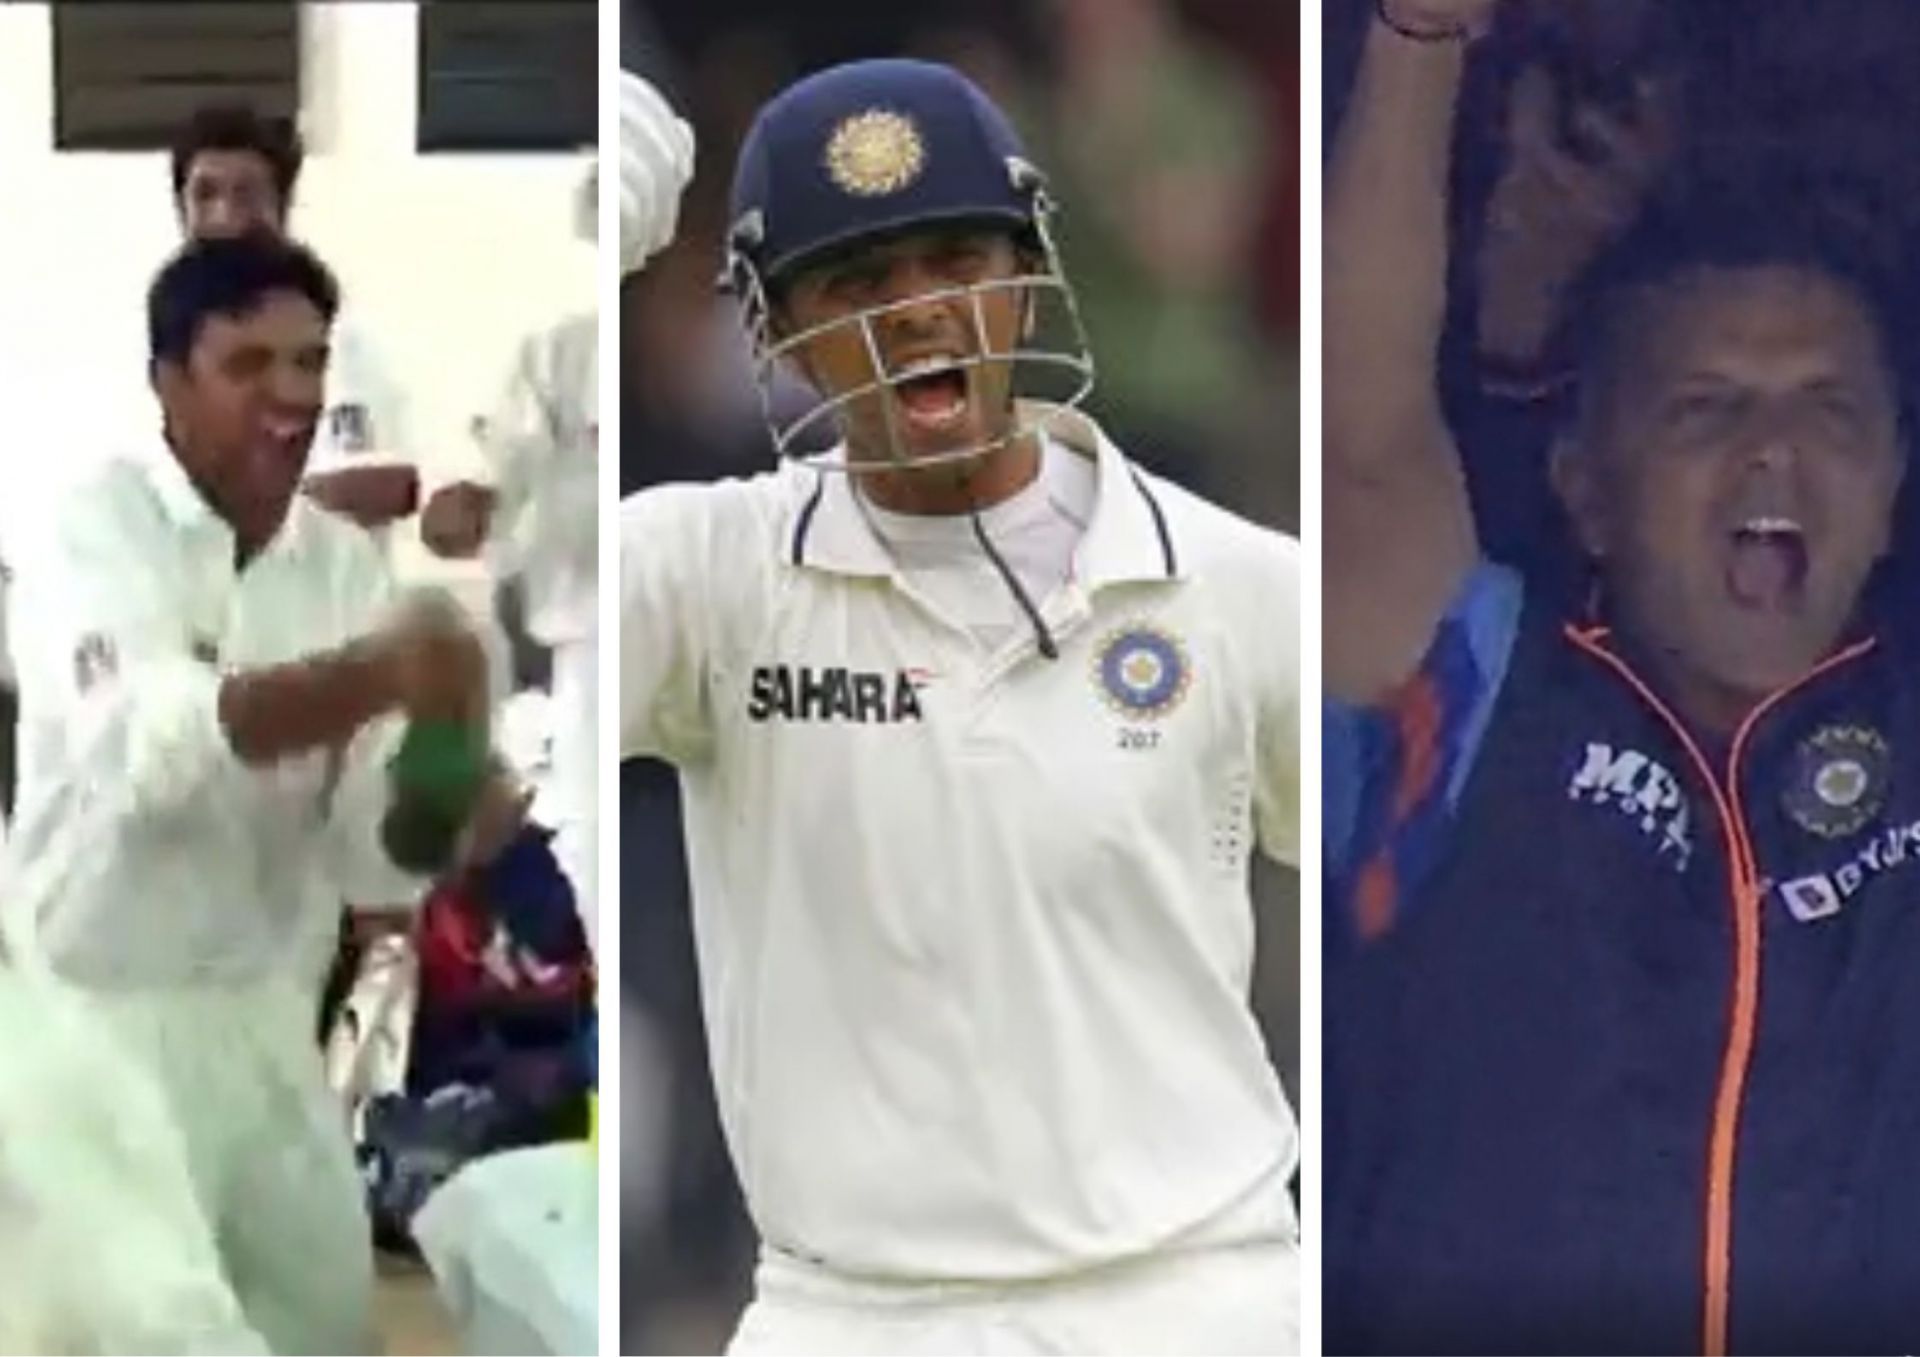 Rahul Dravid has recorded a few iconic celebrations over the years.